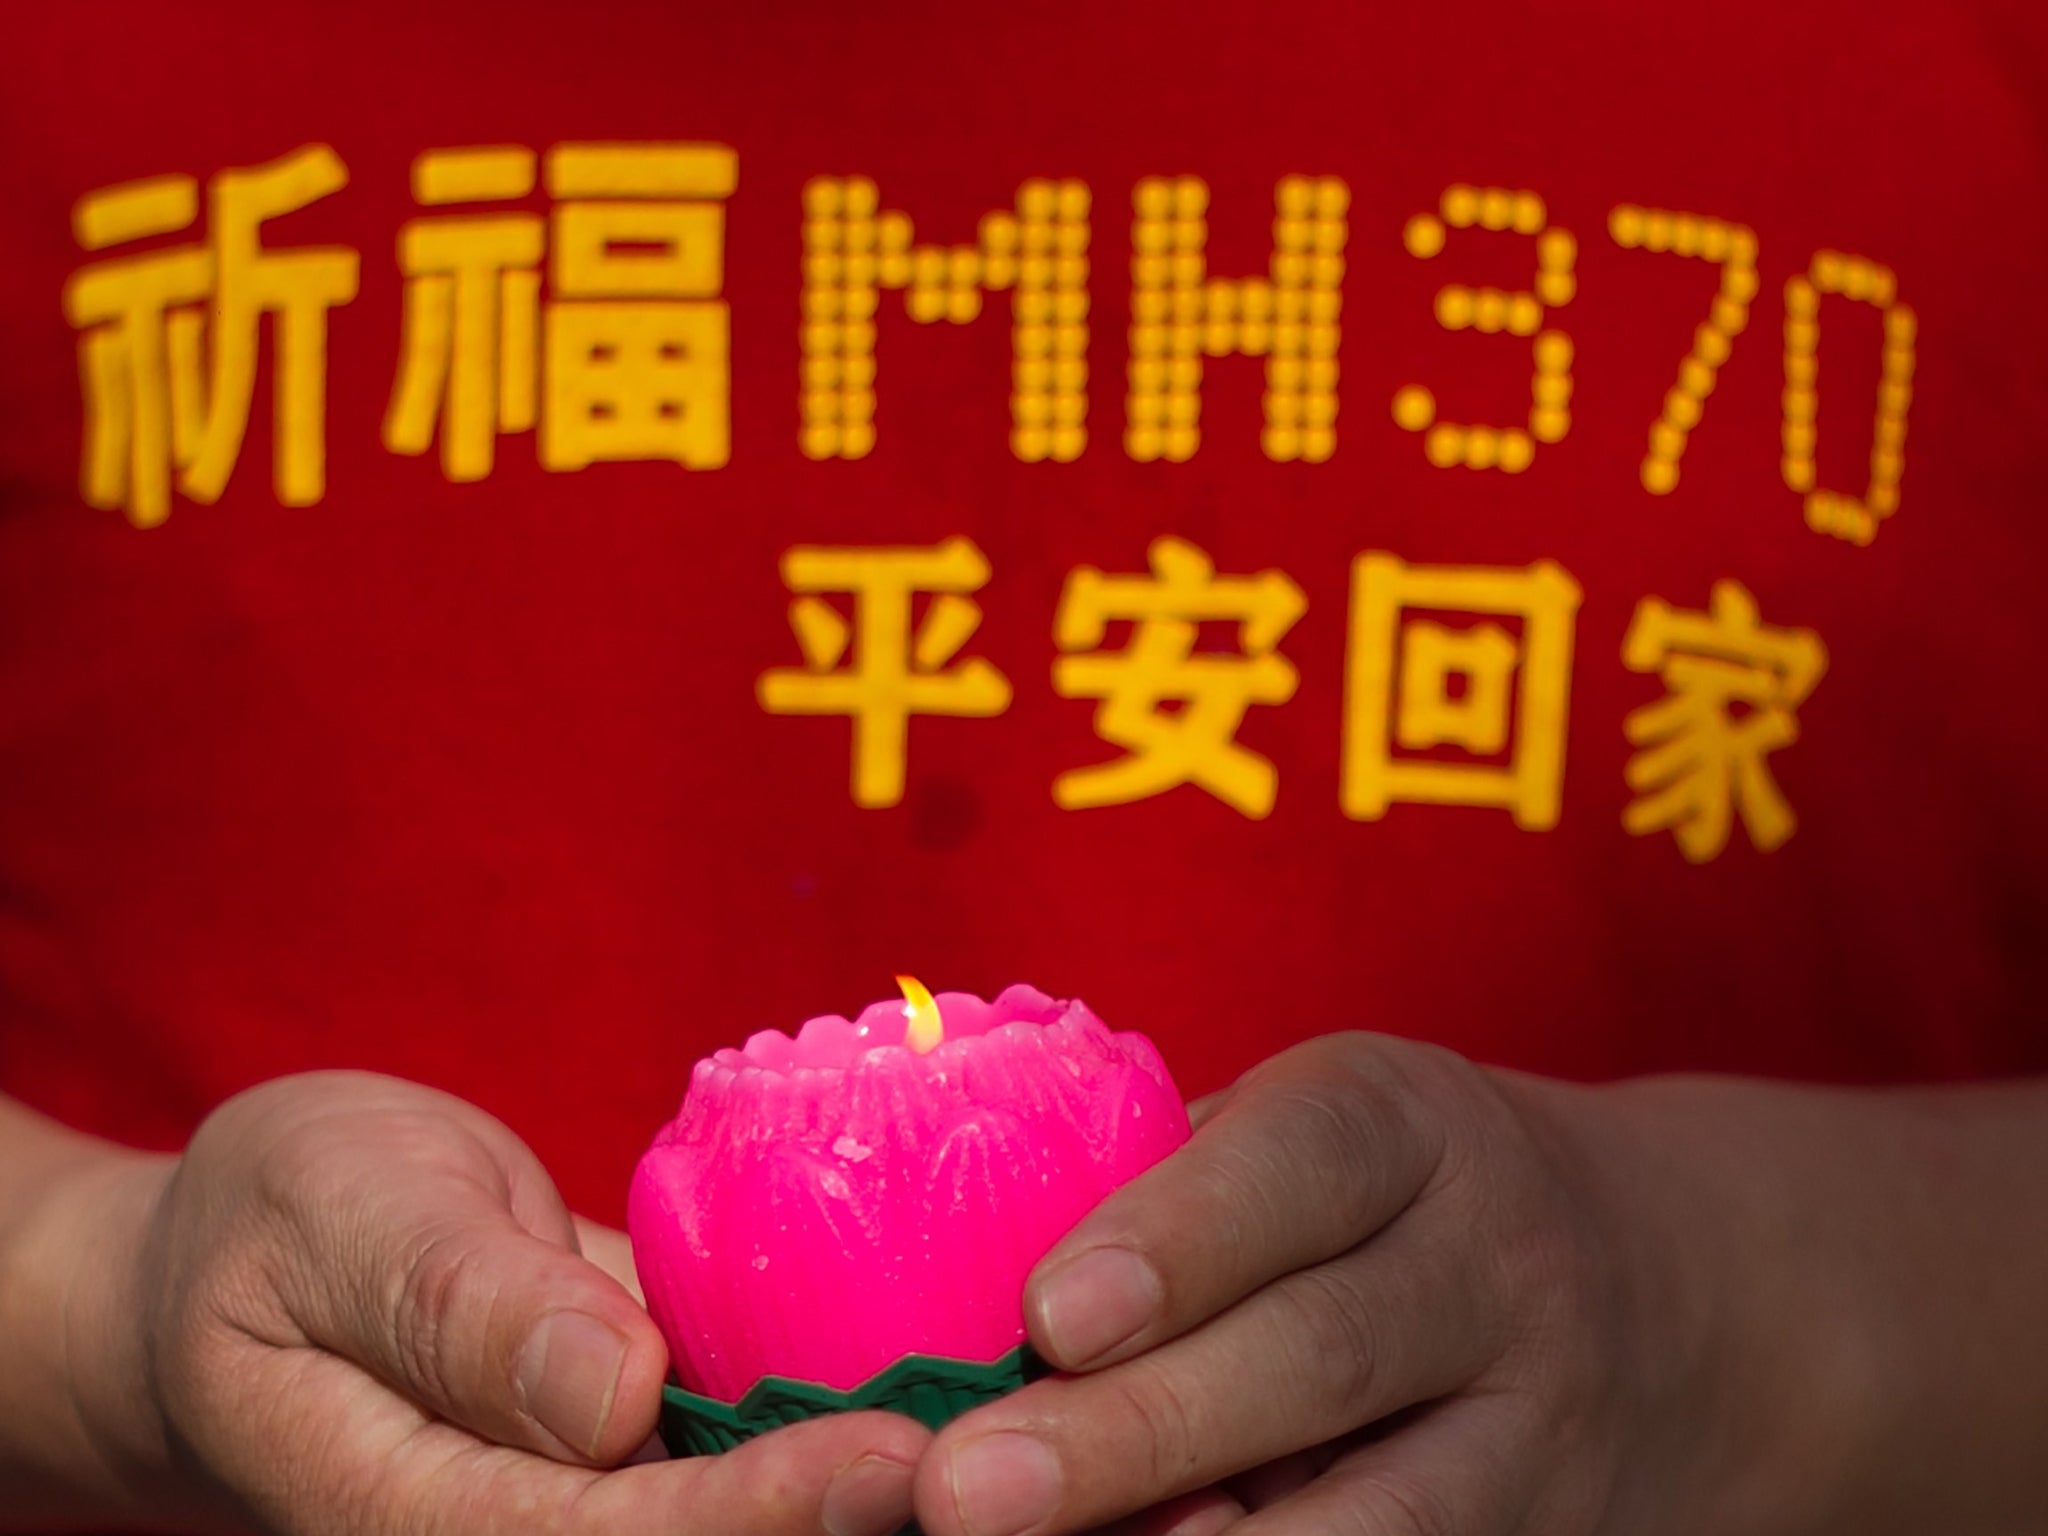 A relative of one of the Chinese passengers from the missing Malaysia Airlines flight MH370 holds a candle